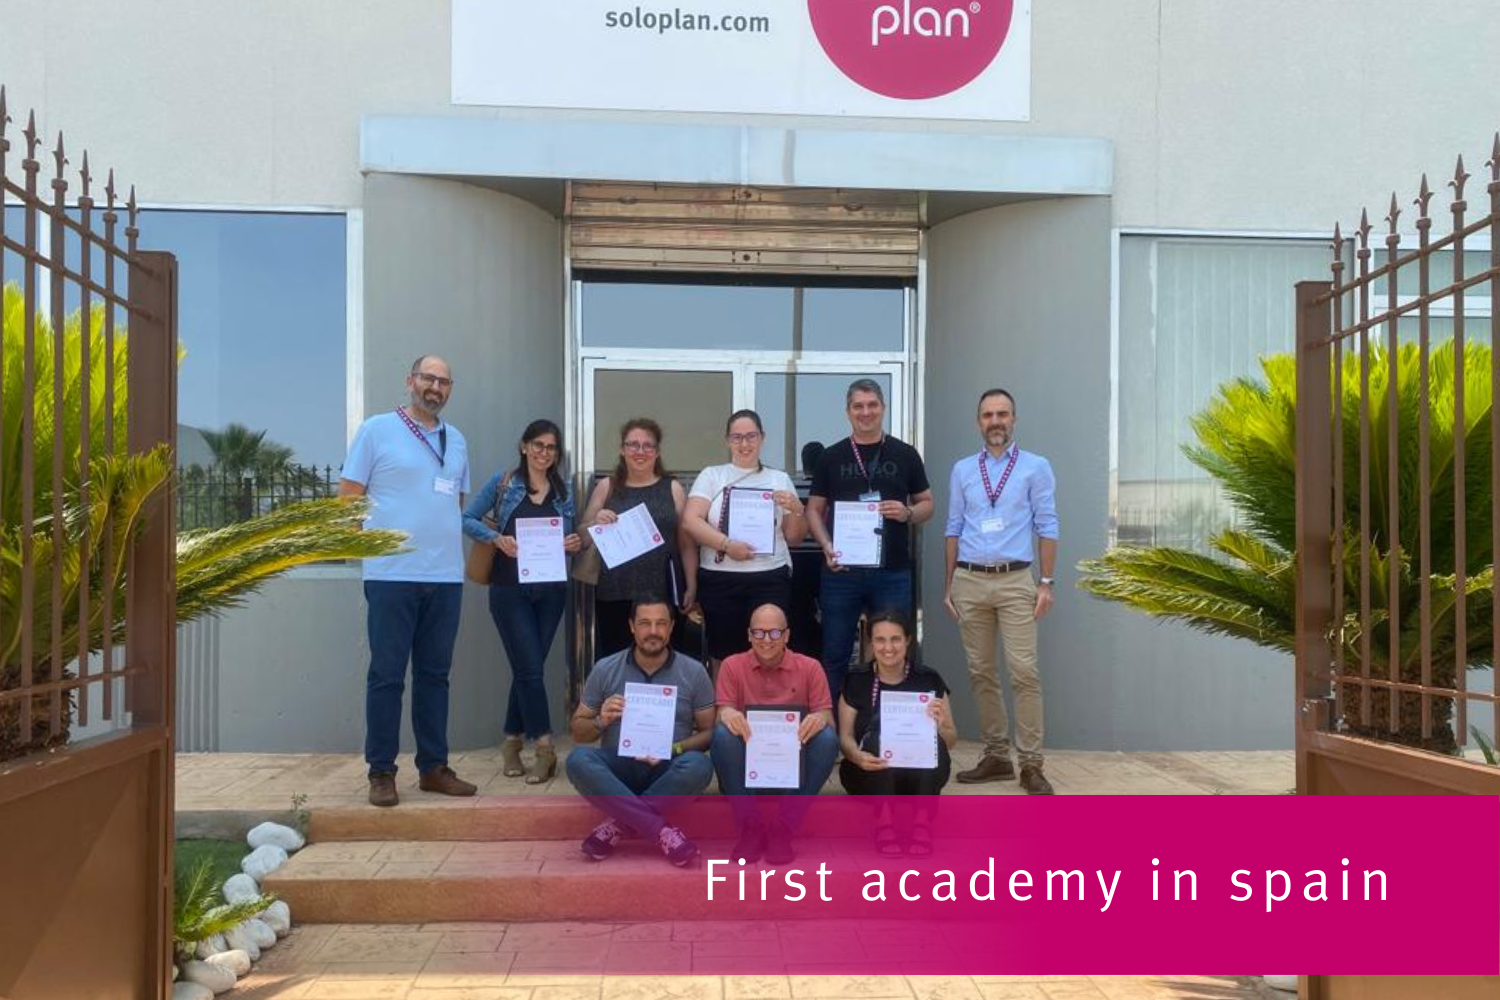 Great success: our first Standard Academy in Spain